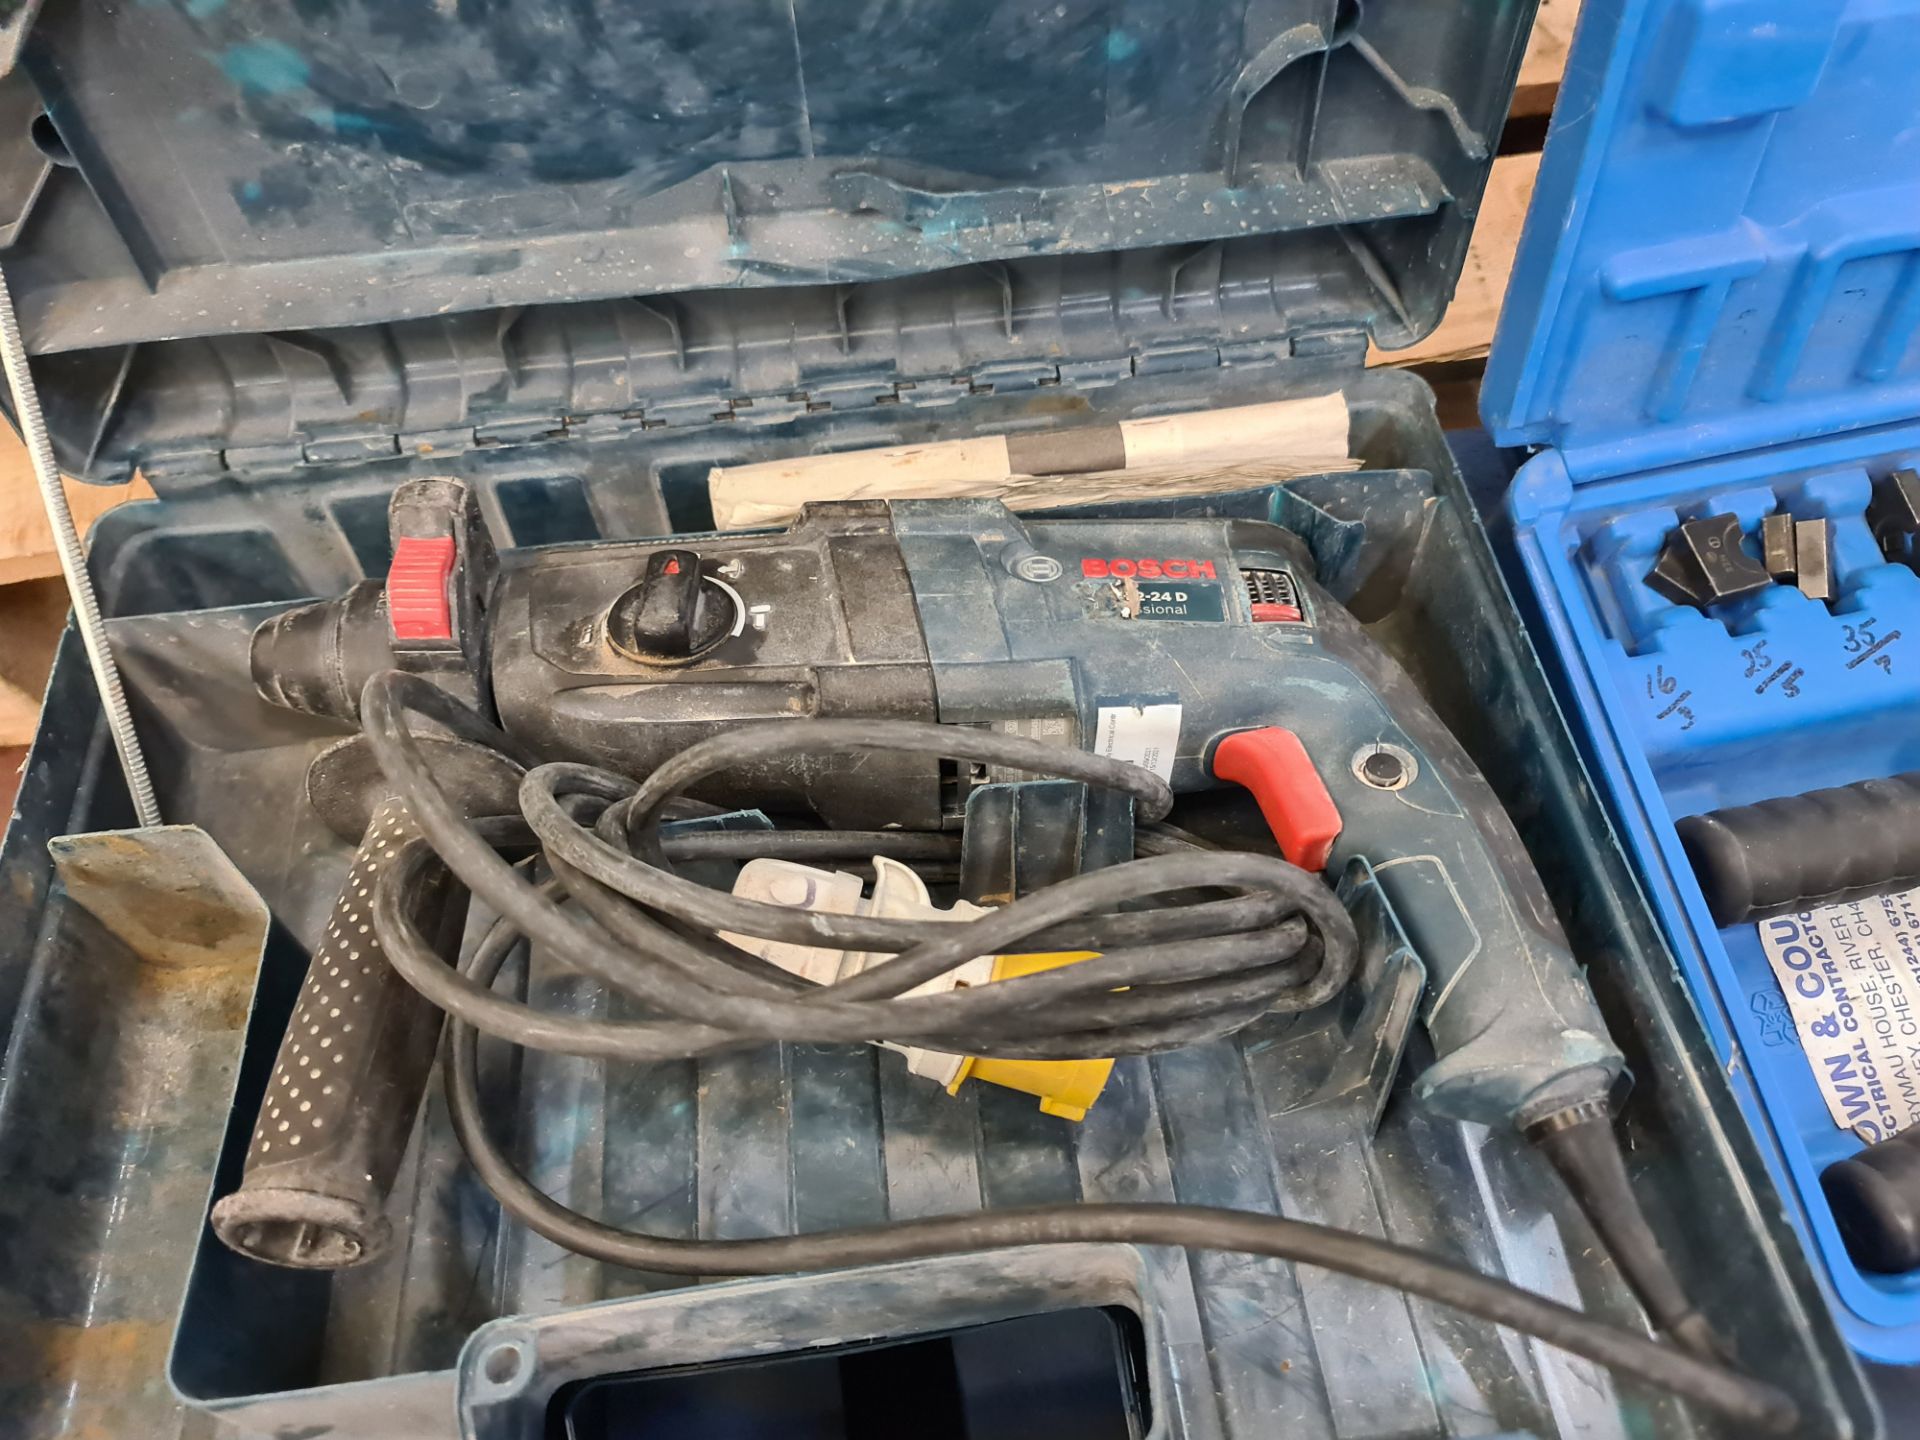 Bosch hammer drill Professional GBH 2-24D, 110v, in case - Image 2 of 5